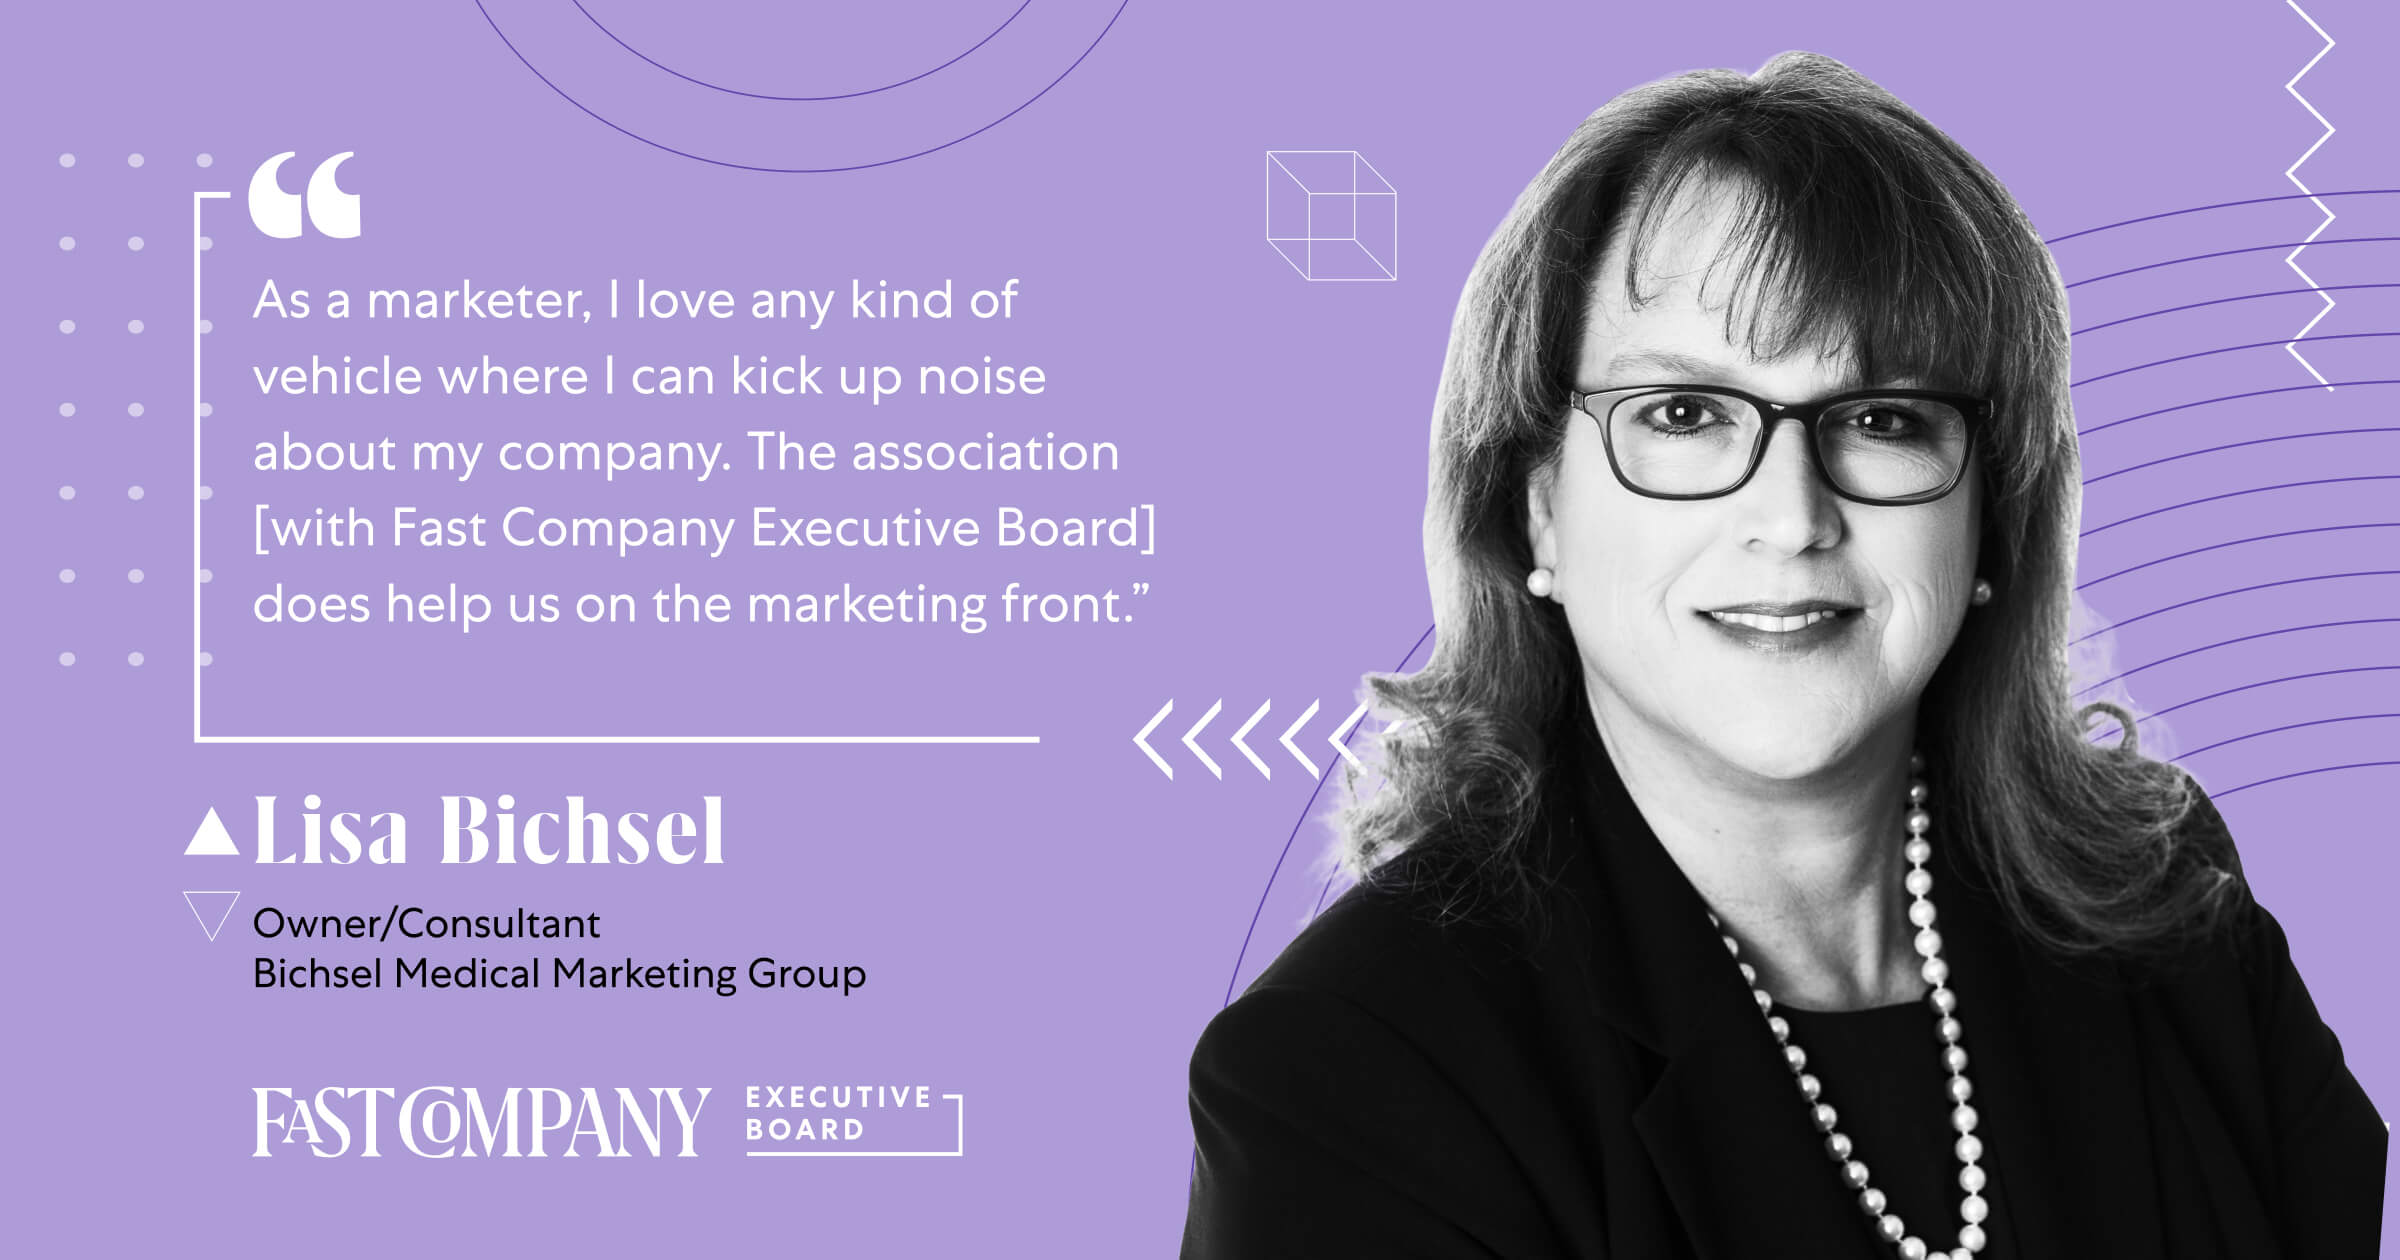 Fast Company Executive Board Helps Lisa Bichsel Amplify Her Company’s Marketing Efforts